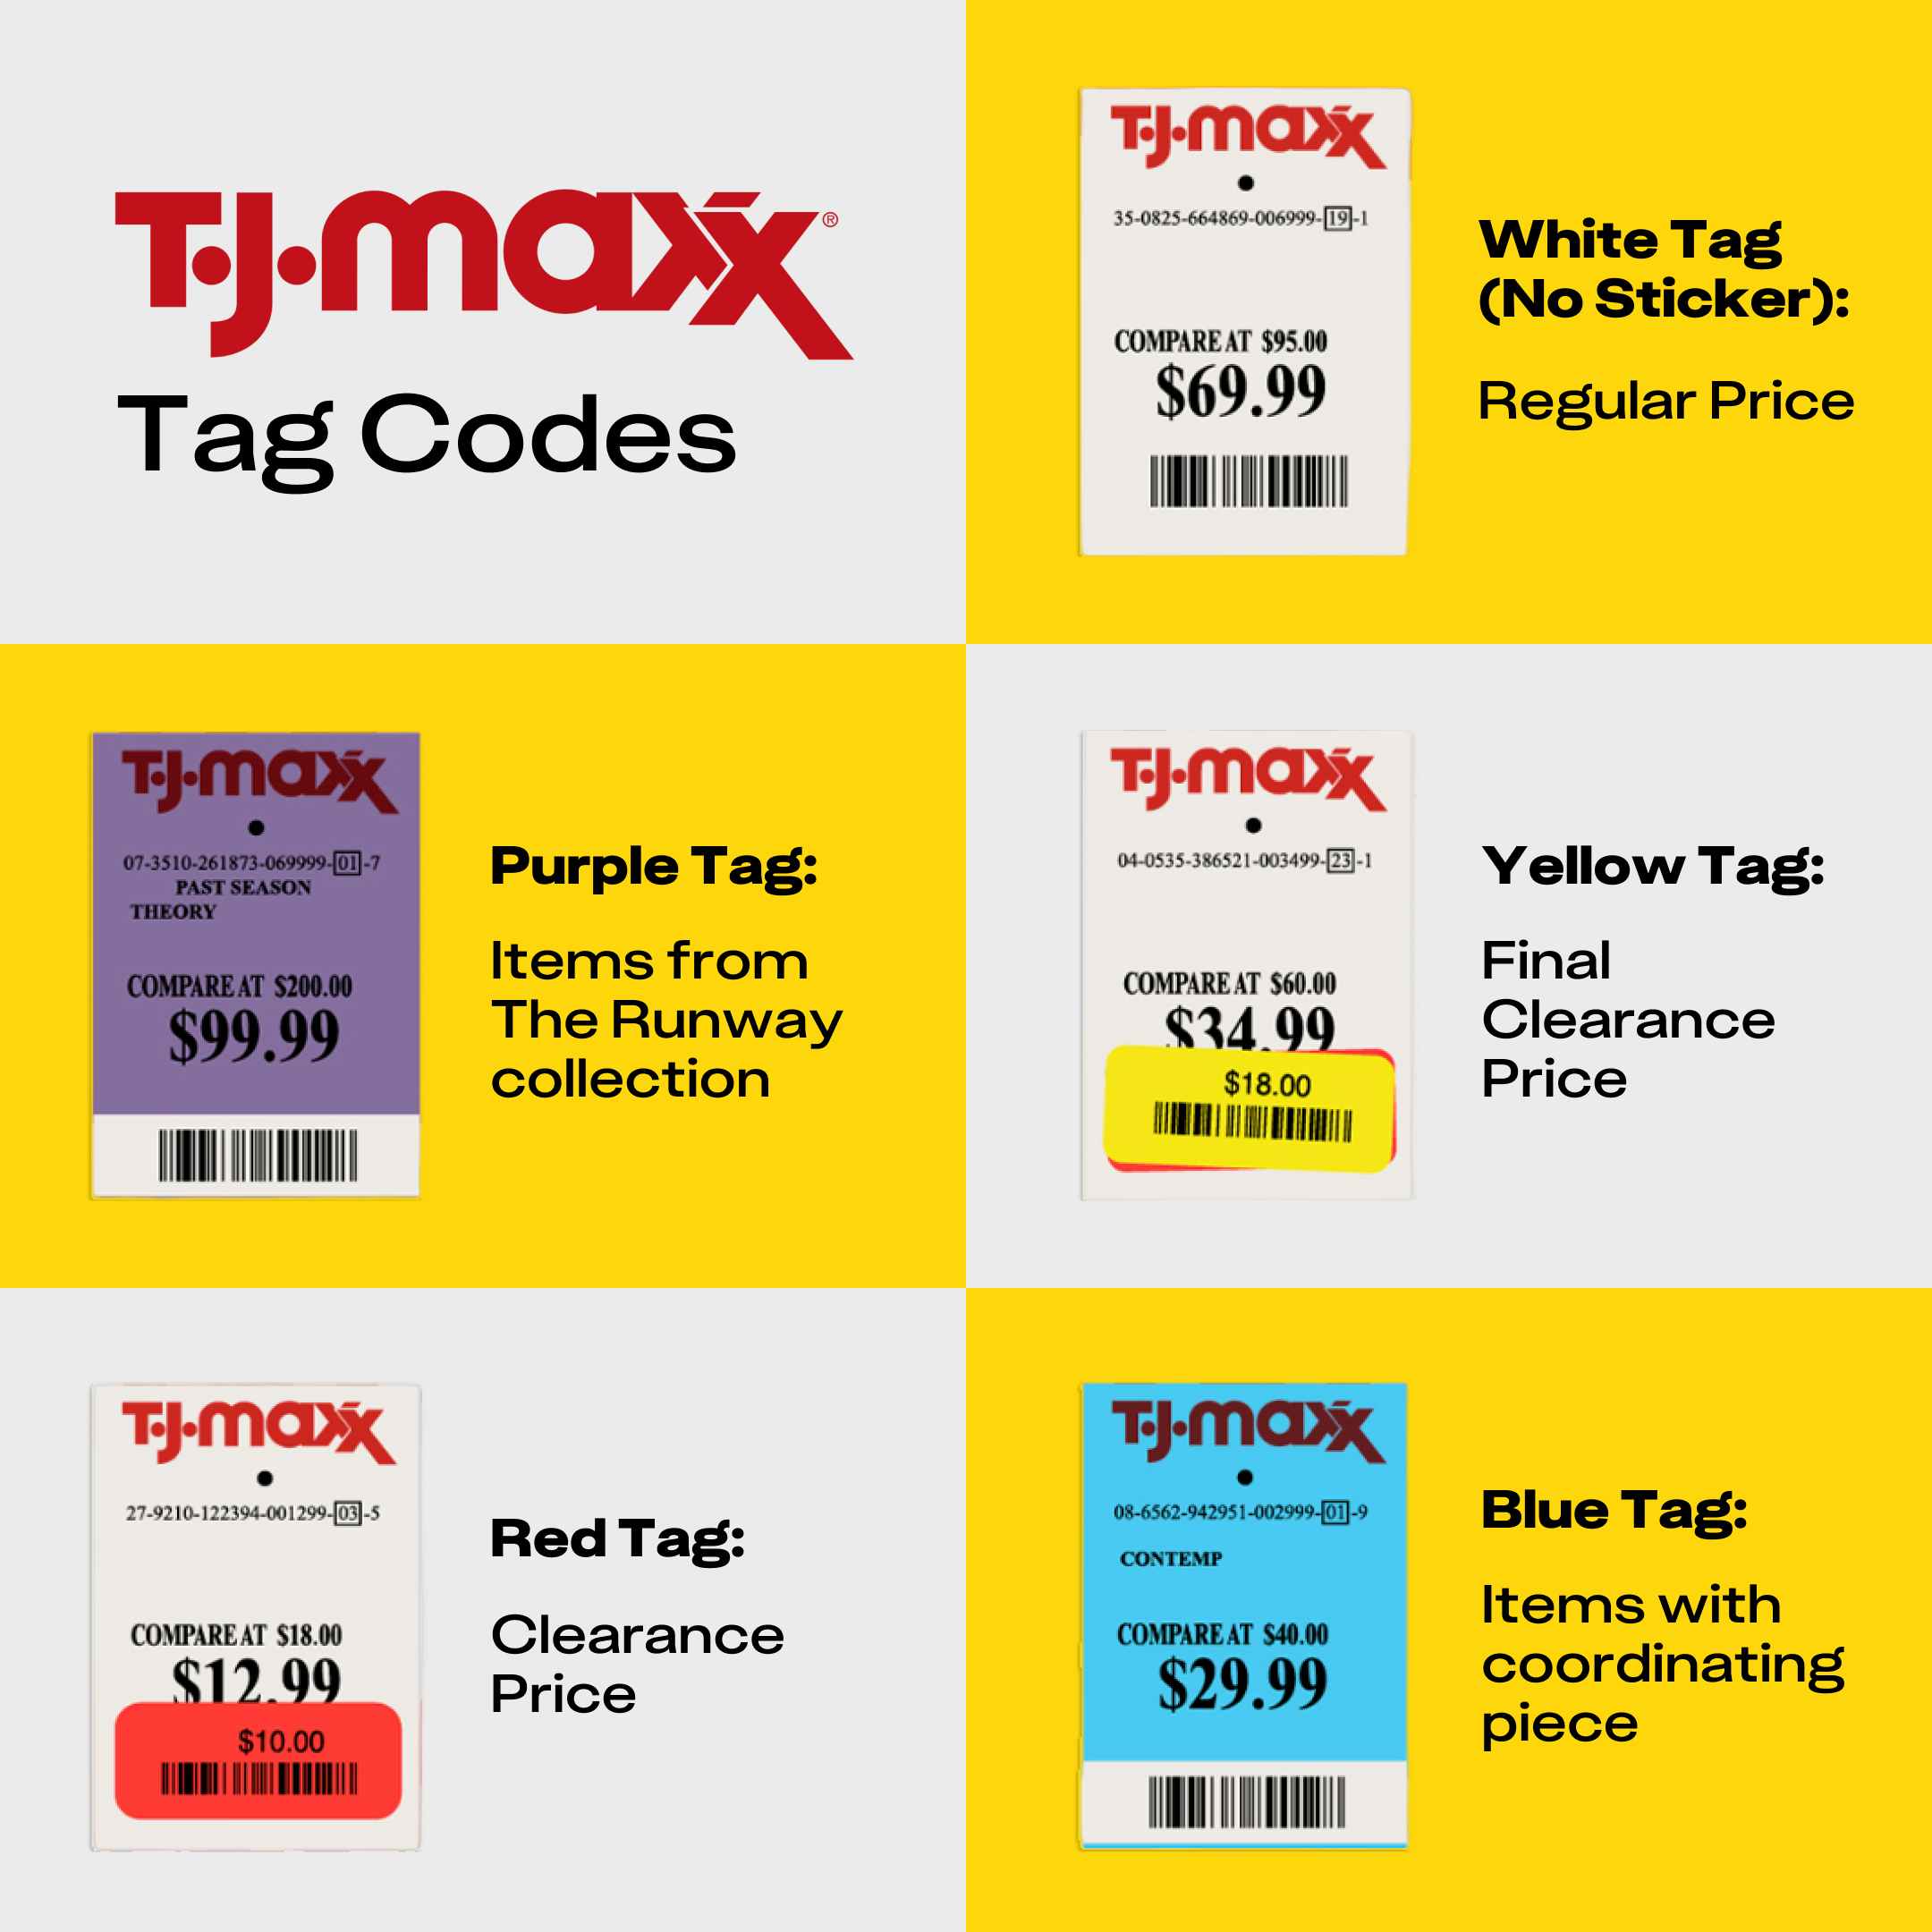 TJ Maxx Annual Yellow Tag Clearance Event